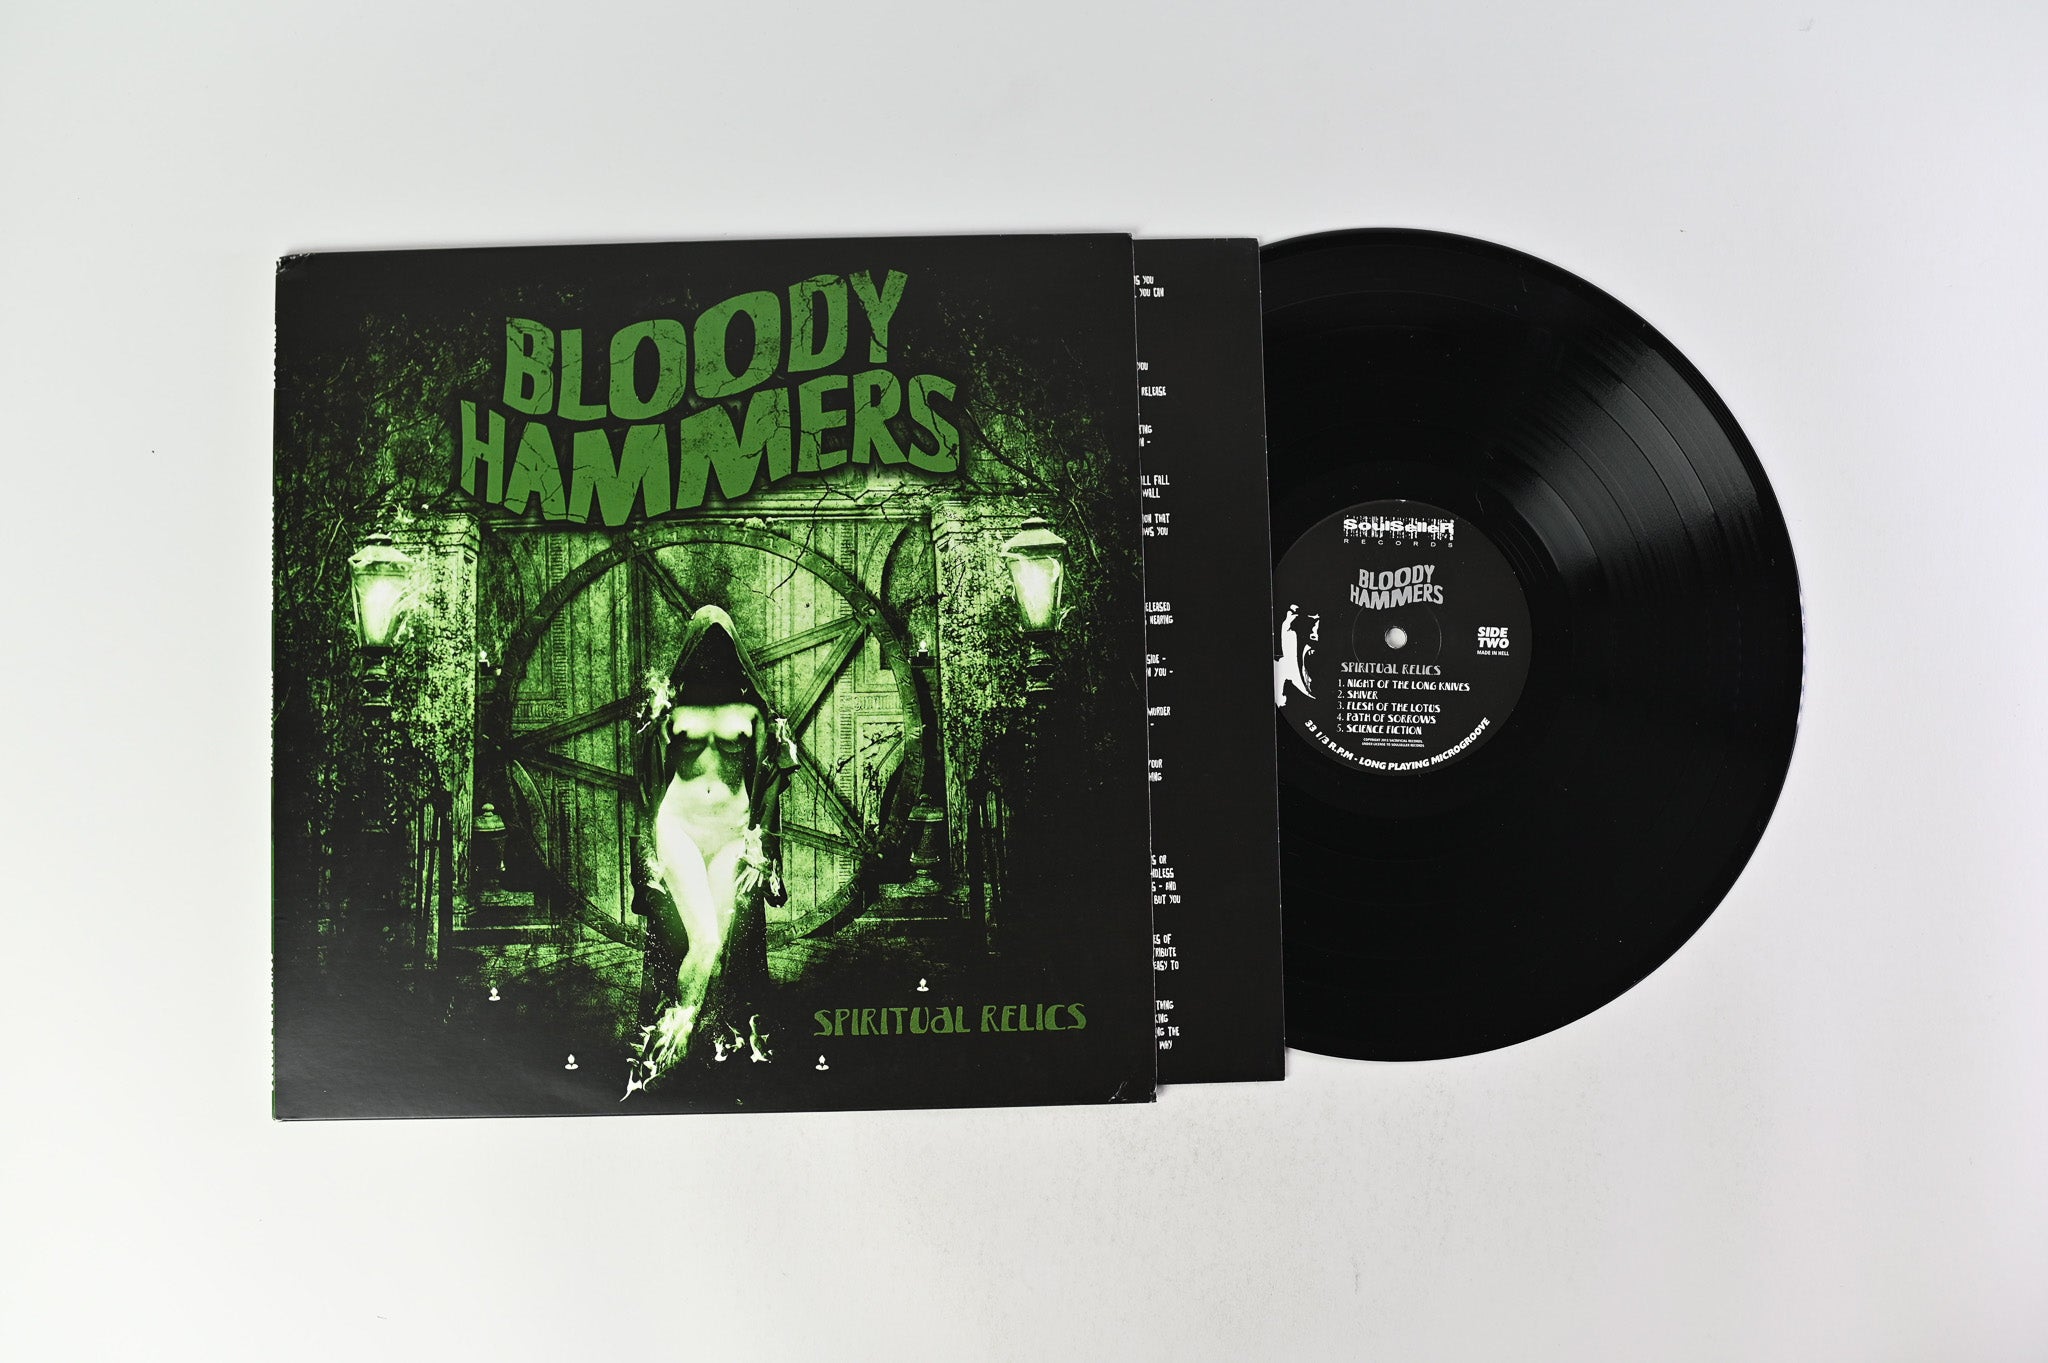 Bloody Hammers - Spiritual Relics on Soulseller Records